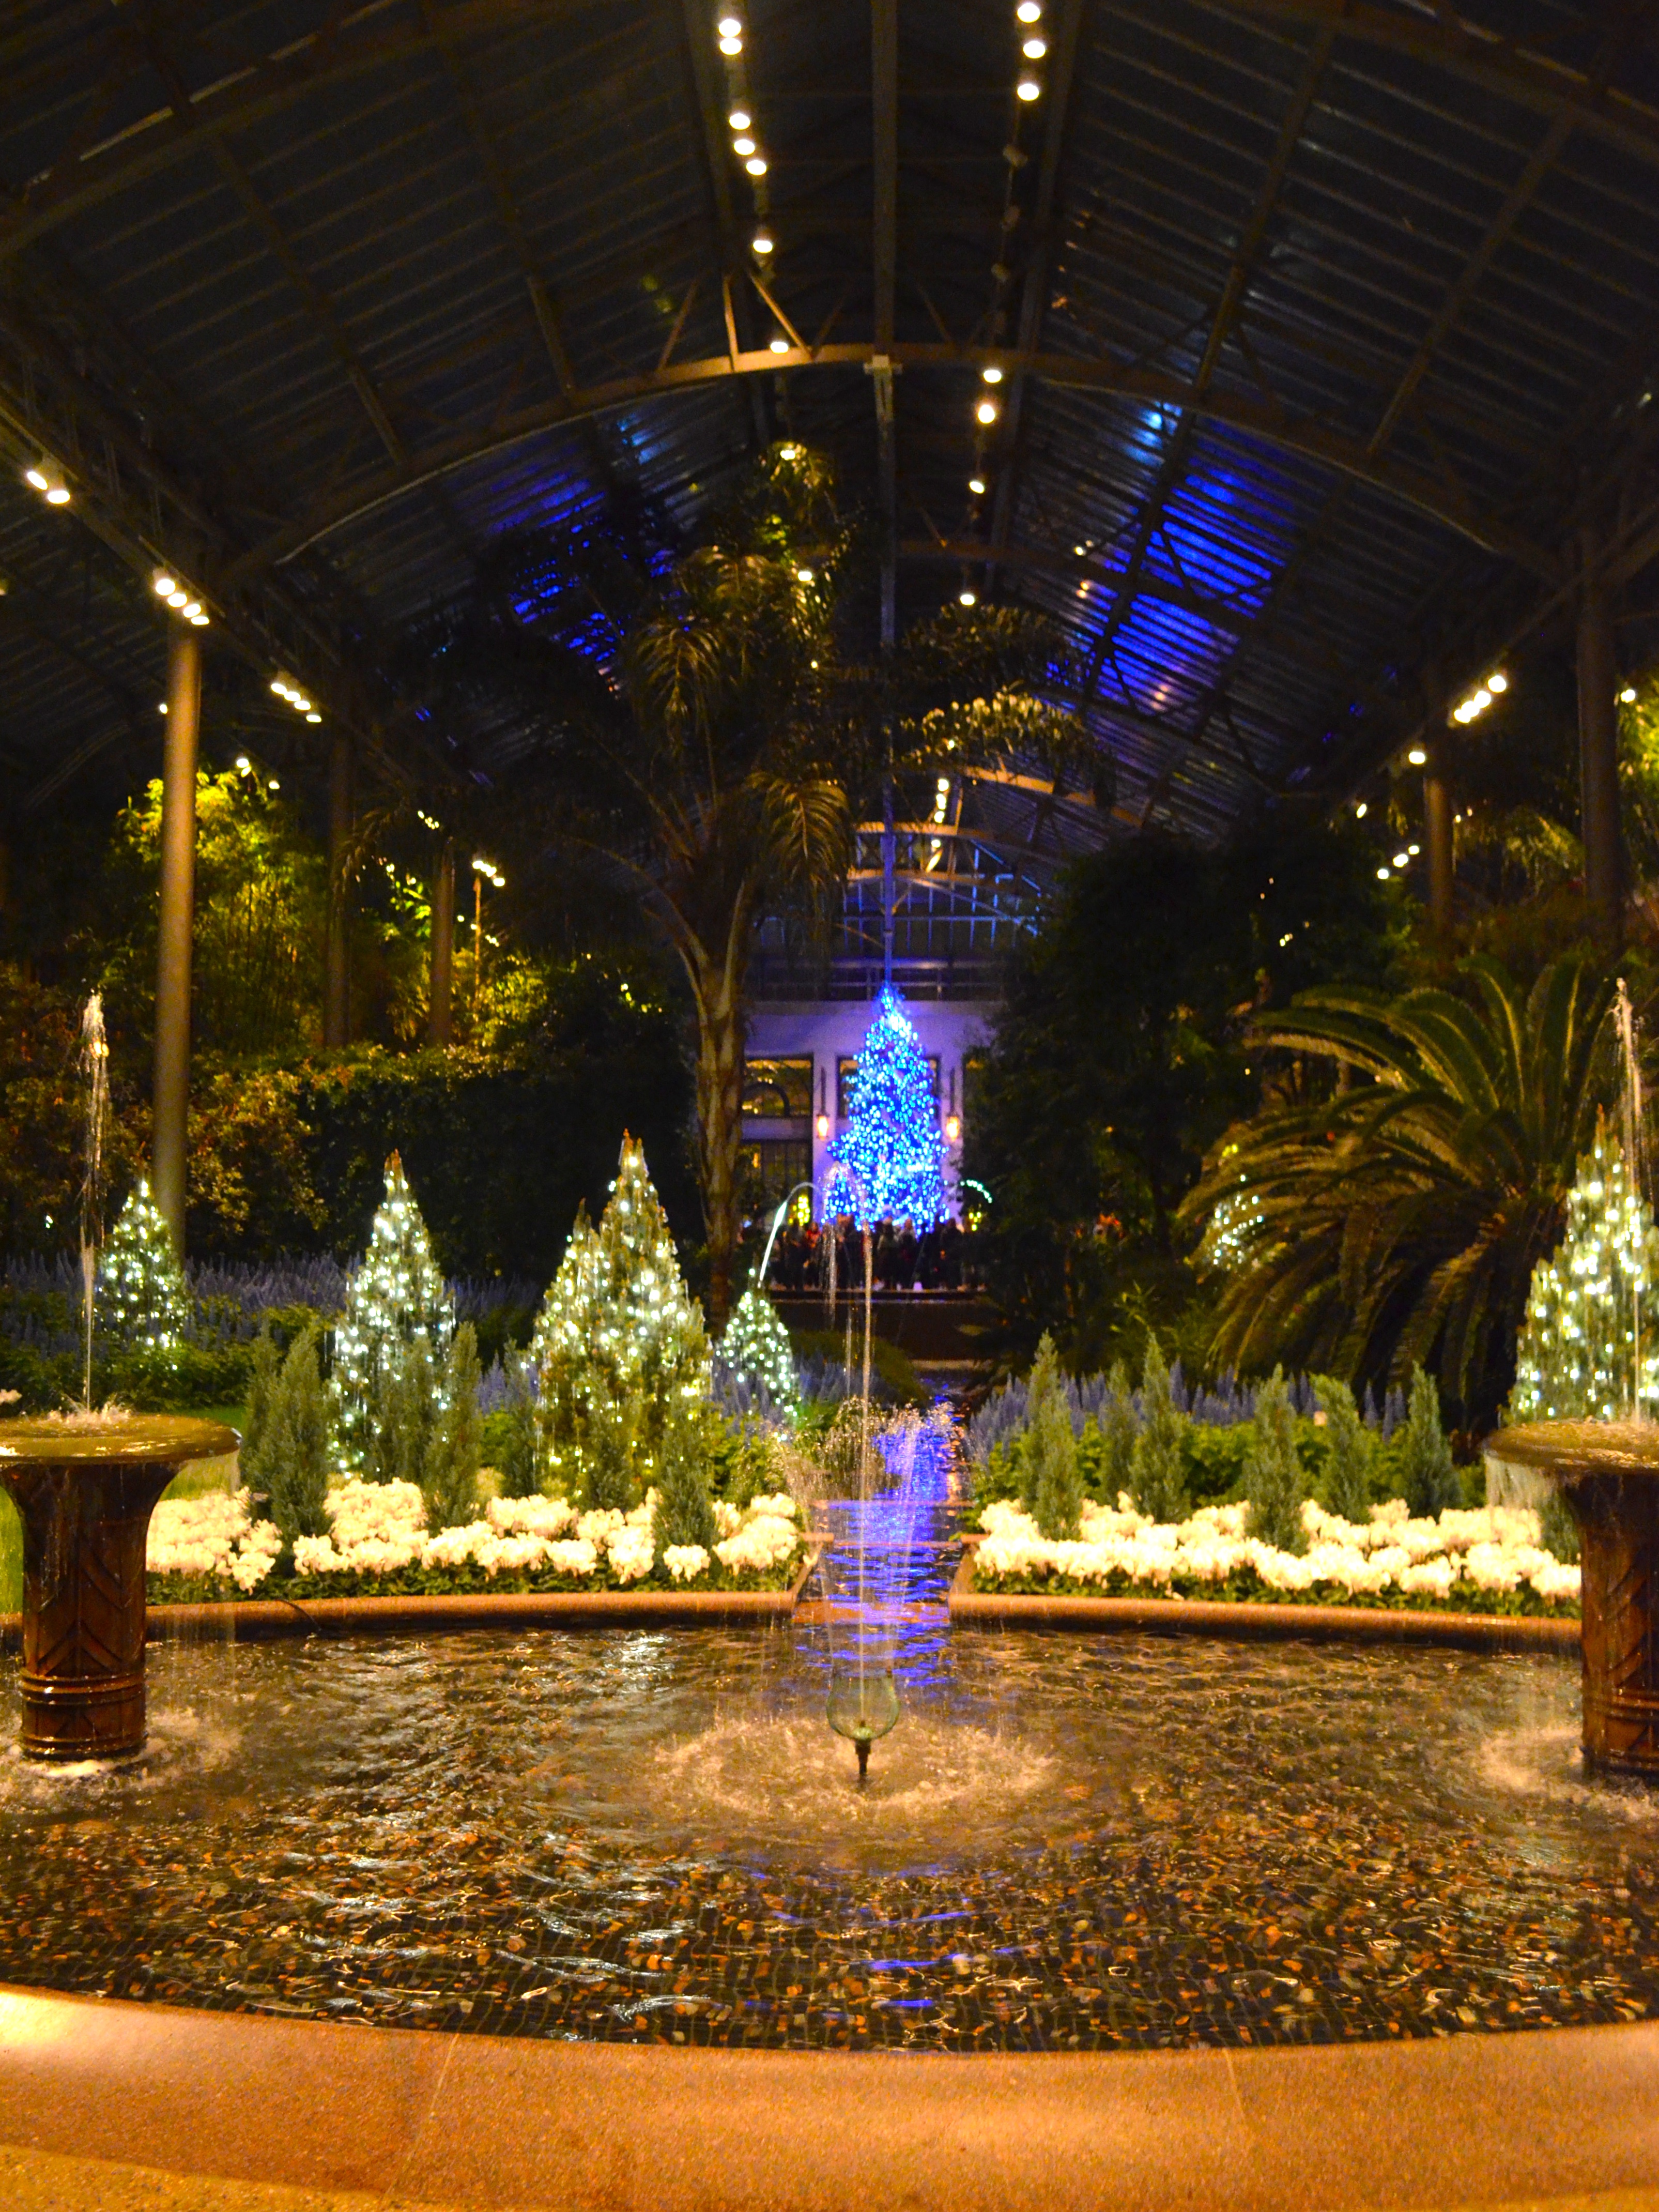 THE MAGNIFICENT LONGWOOD GARDENS AT CHRISTMAS